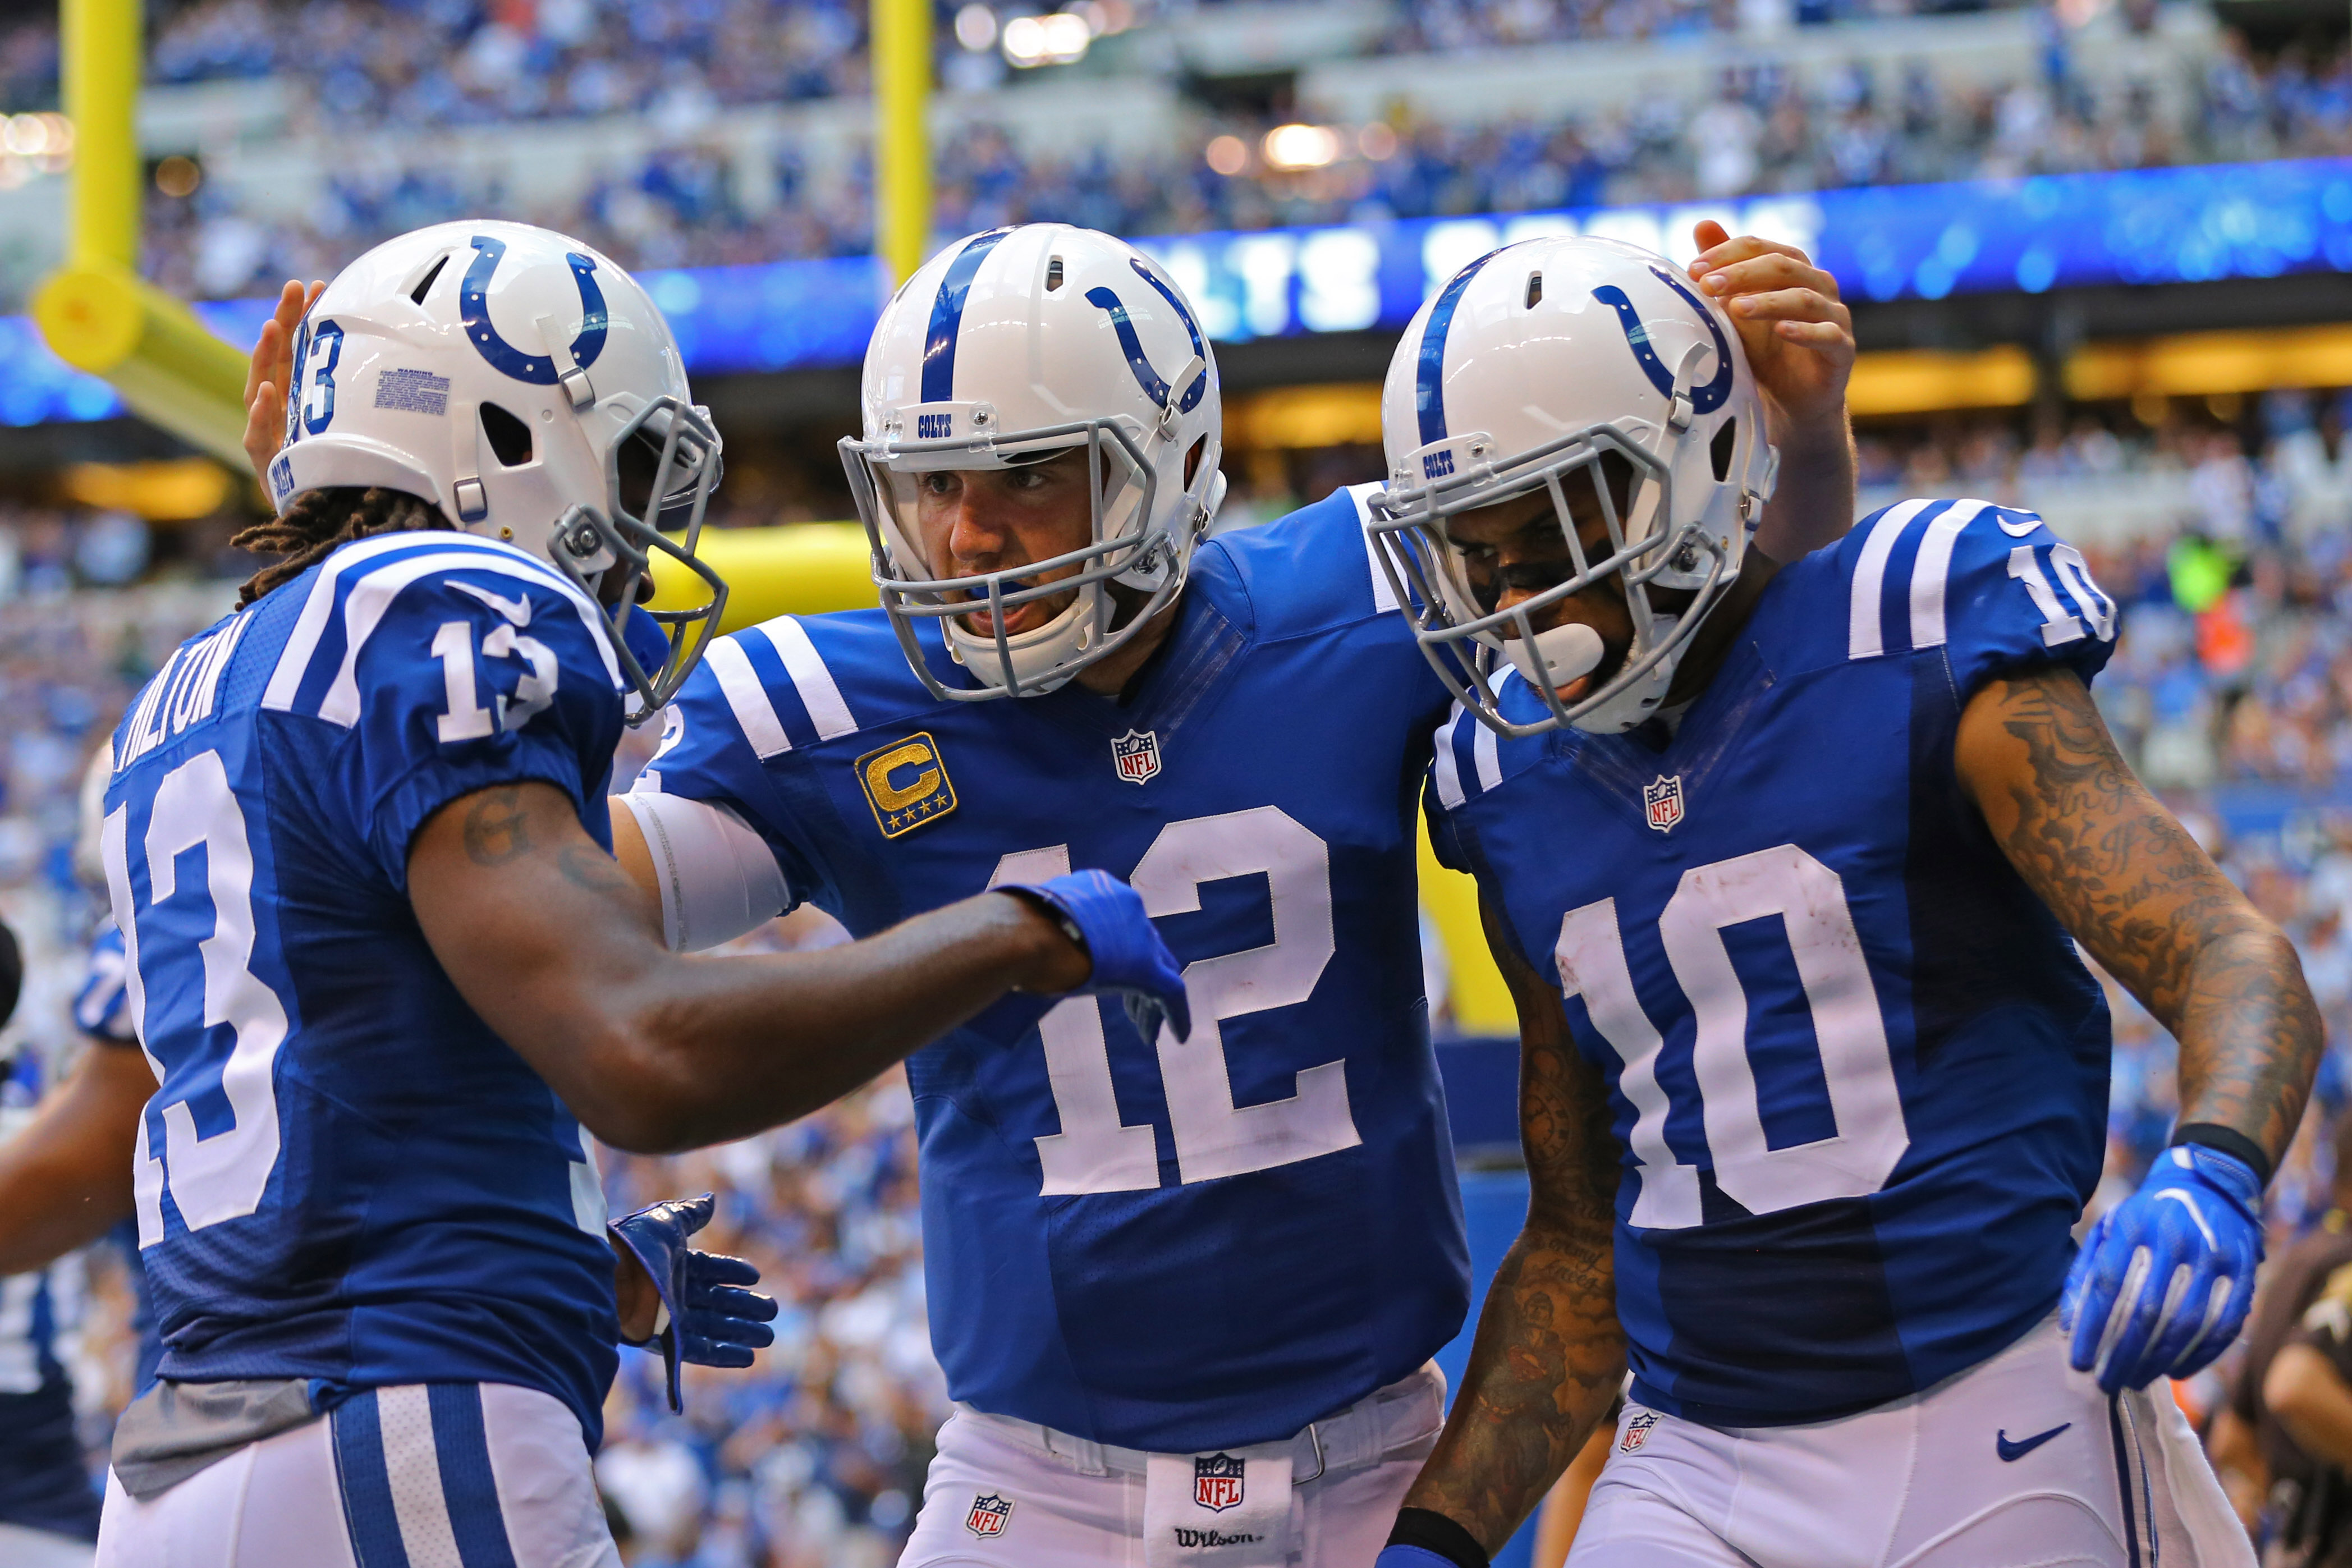 indianapolis-colts-projected-depth-chart-after-nfl-draft